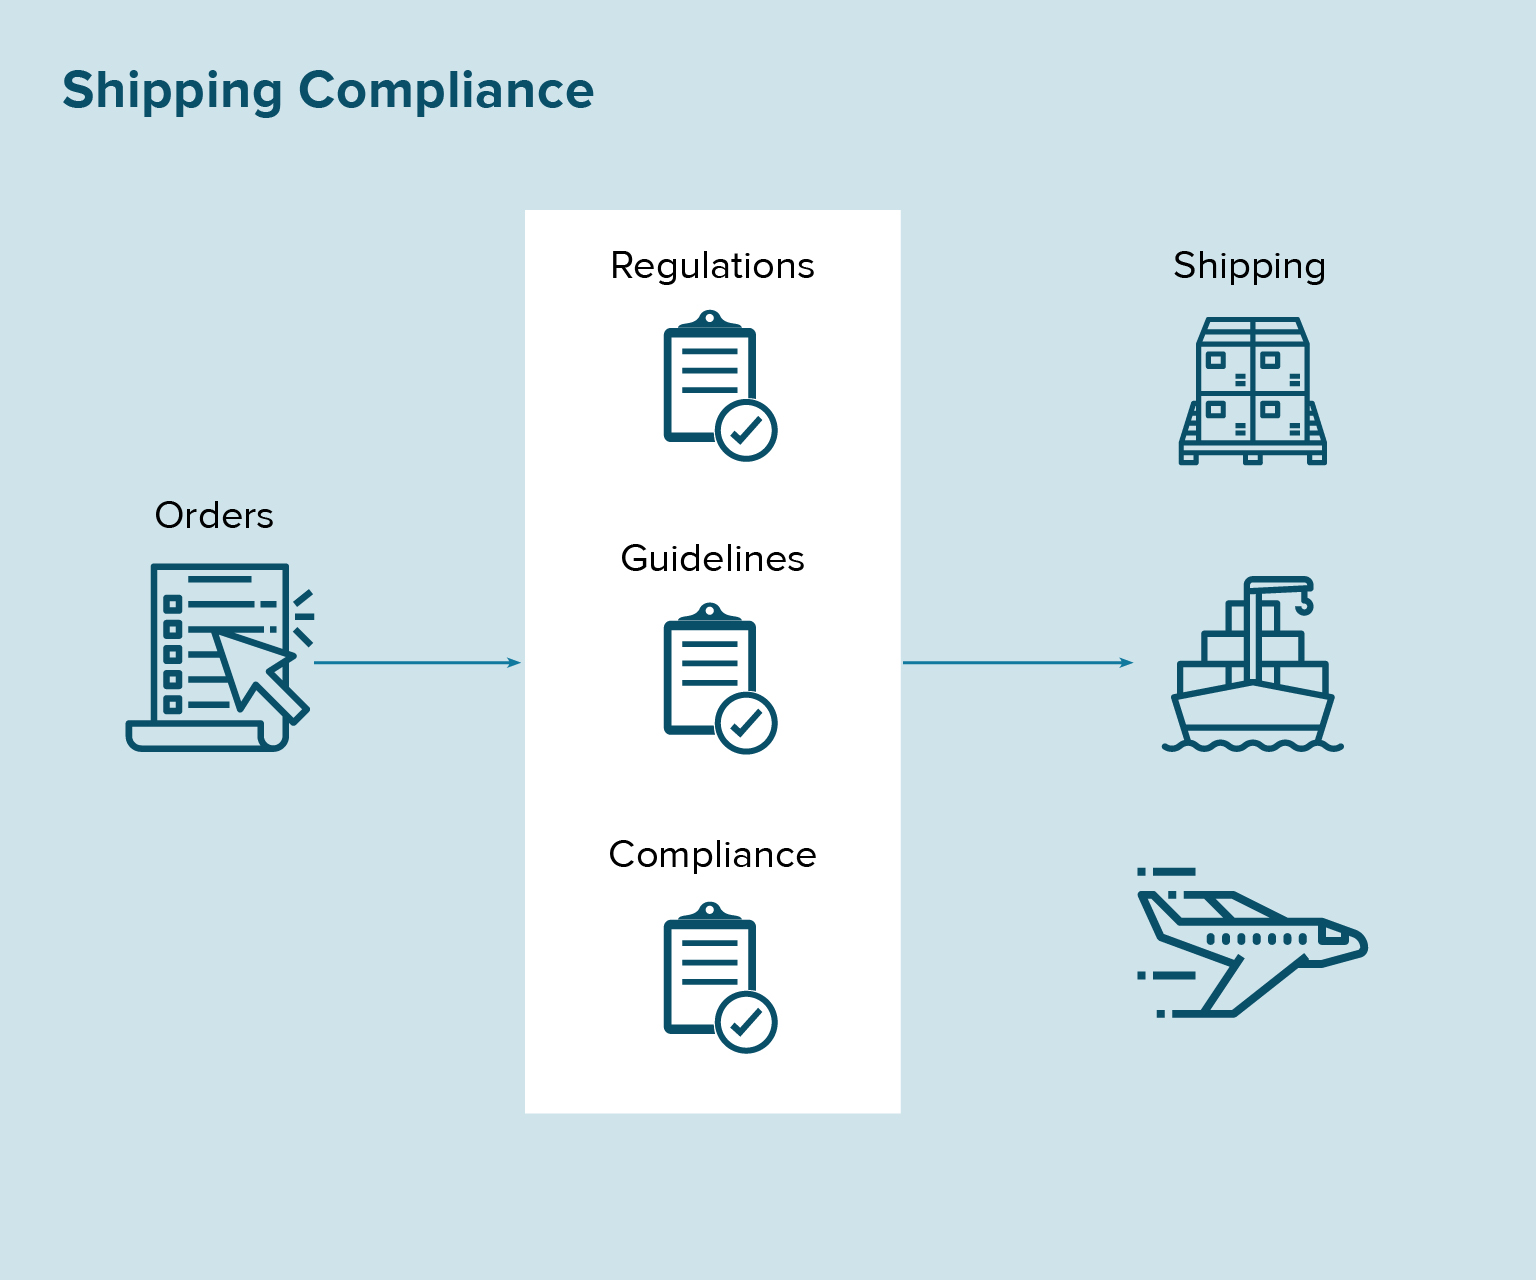 Shipping Compliance workflow map.